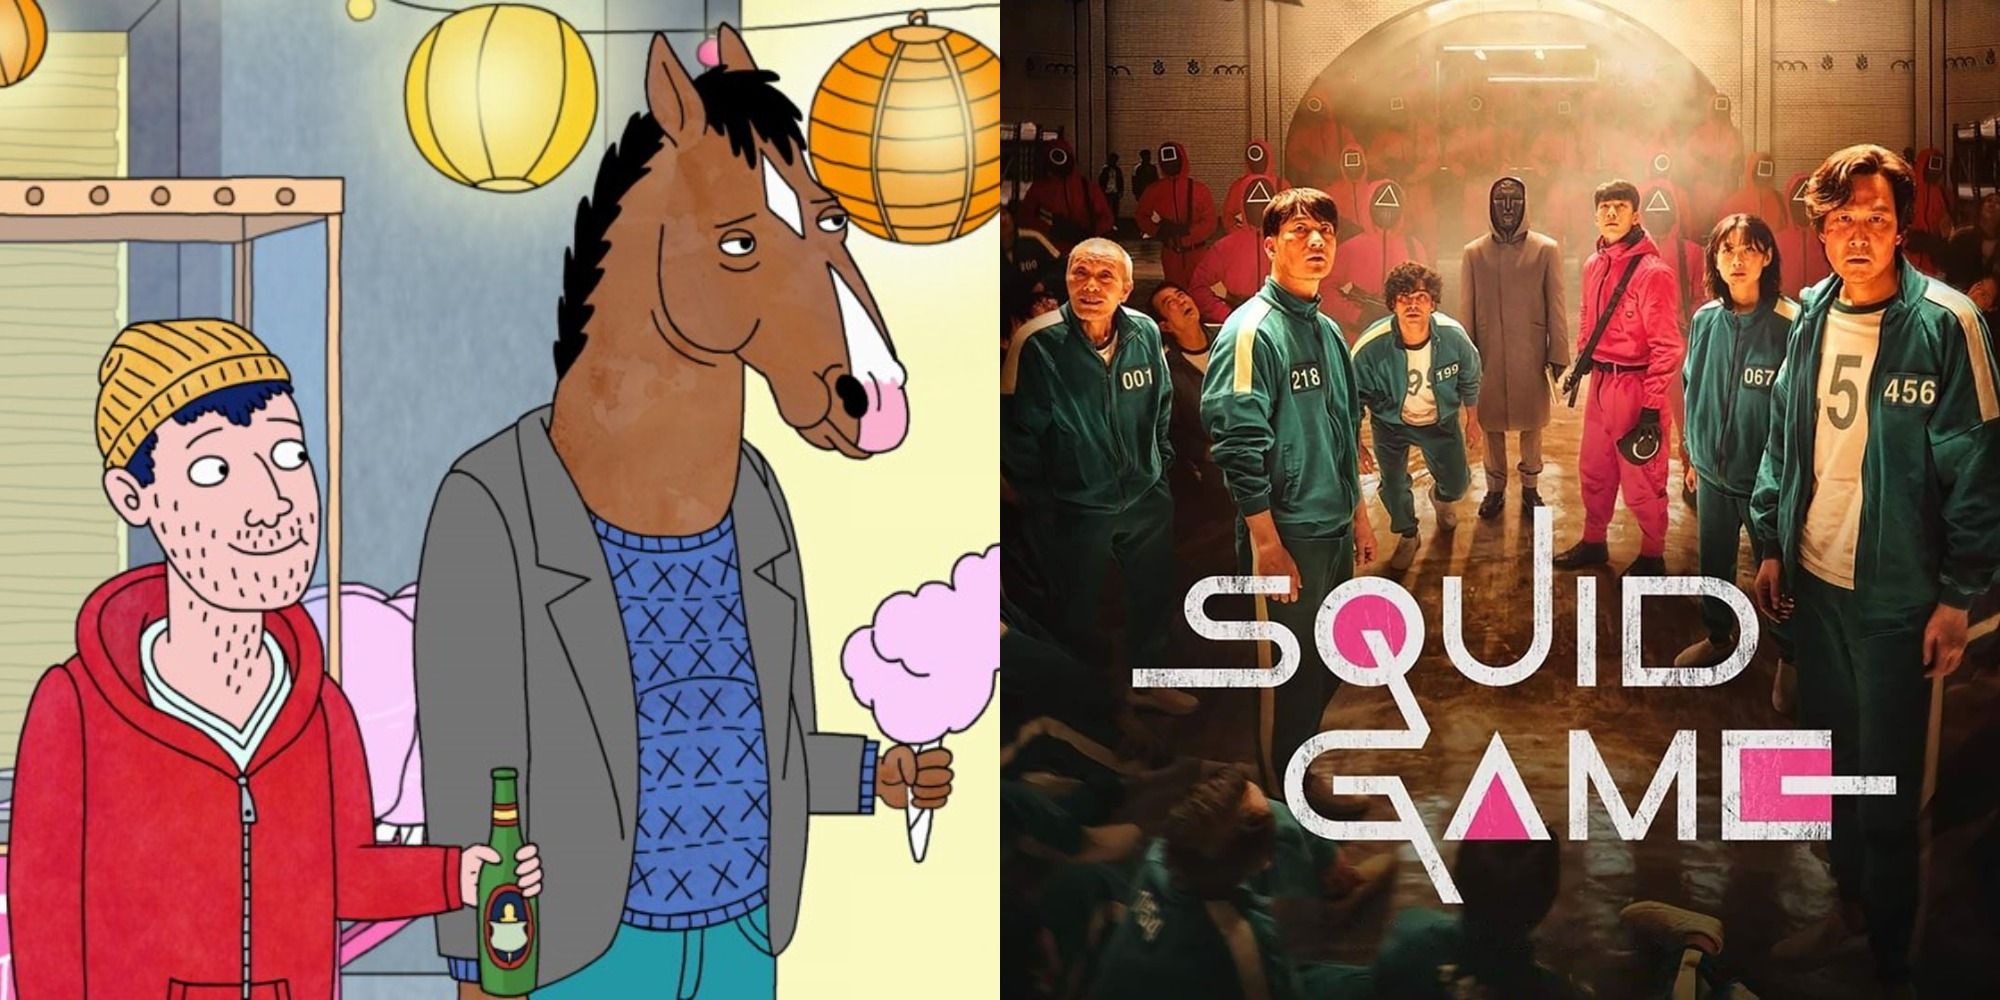 Split image showing Bojack Horseman and Todd Chavez and a poster for Squid Game